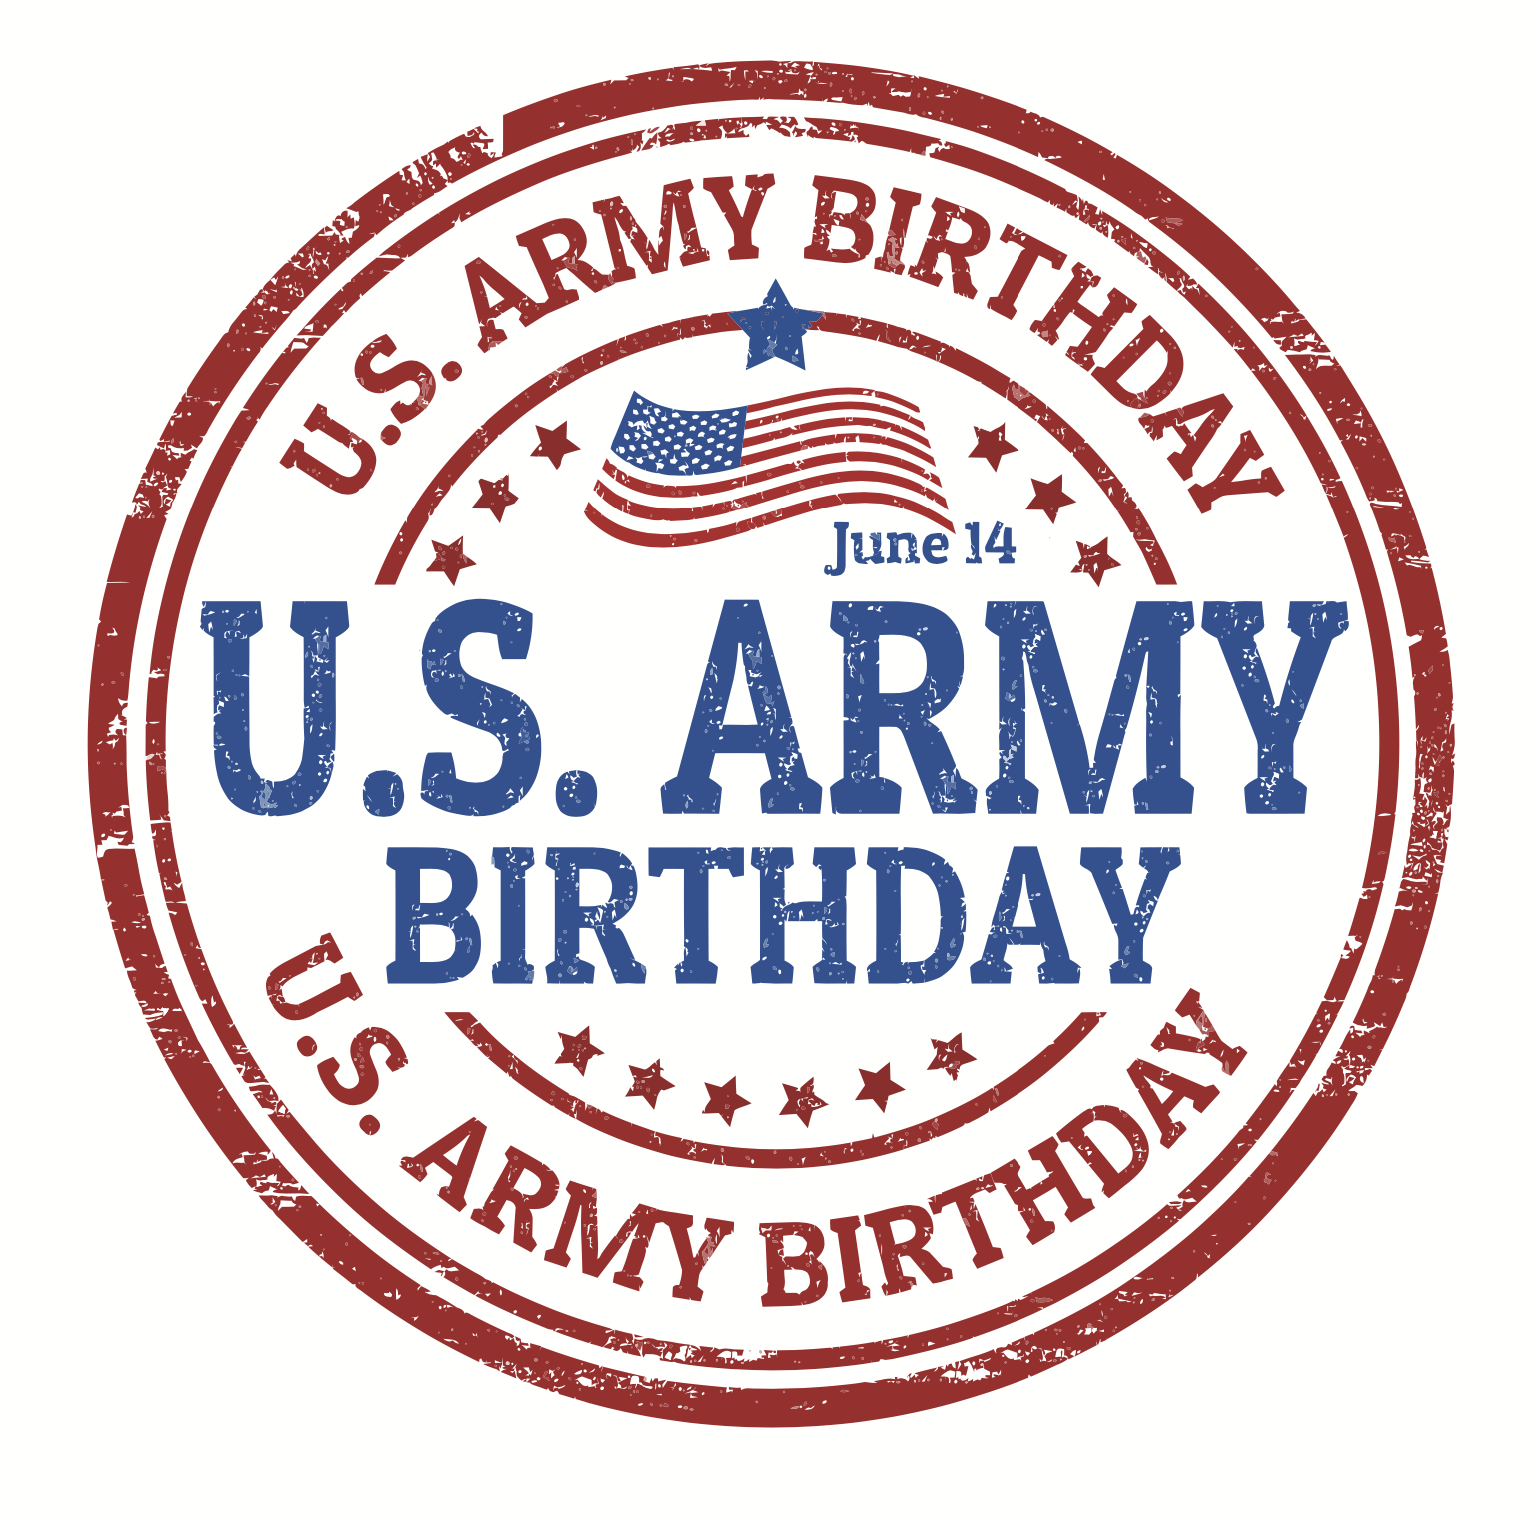 Army Birthday Celebration planned for June 14